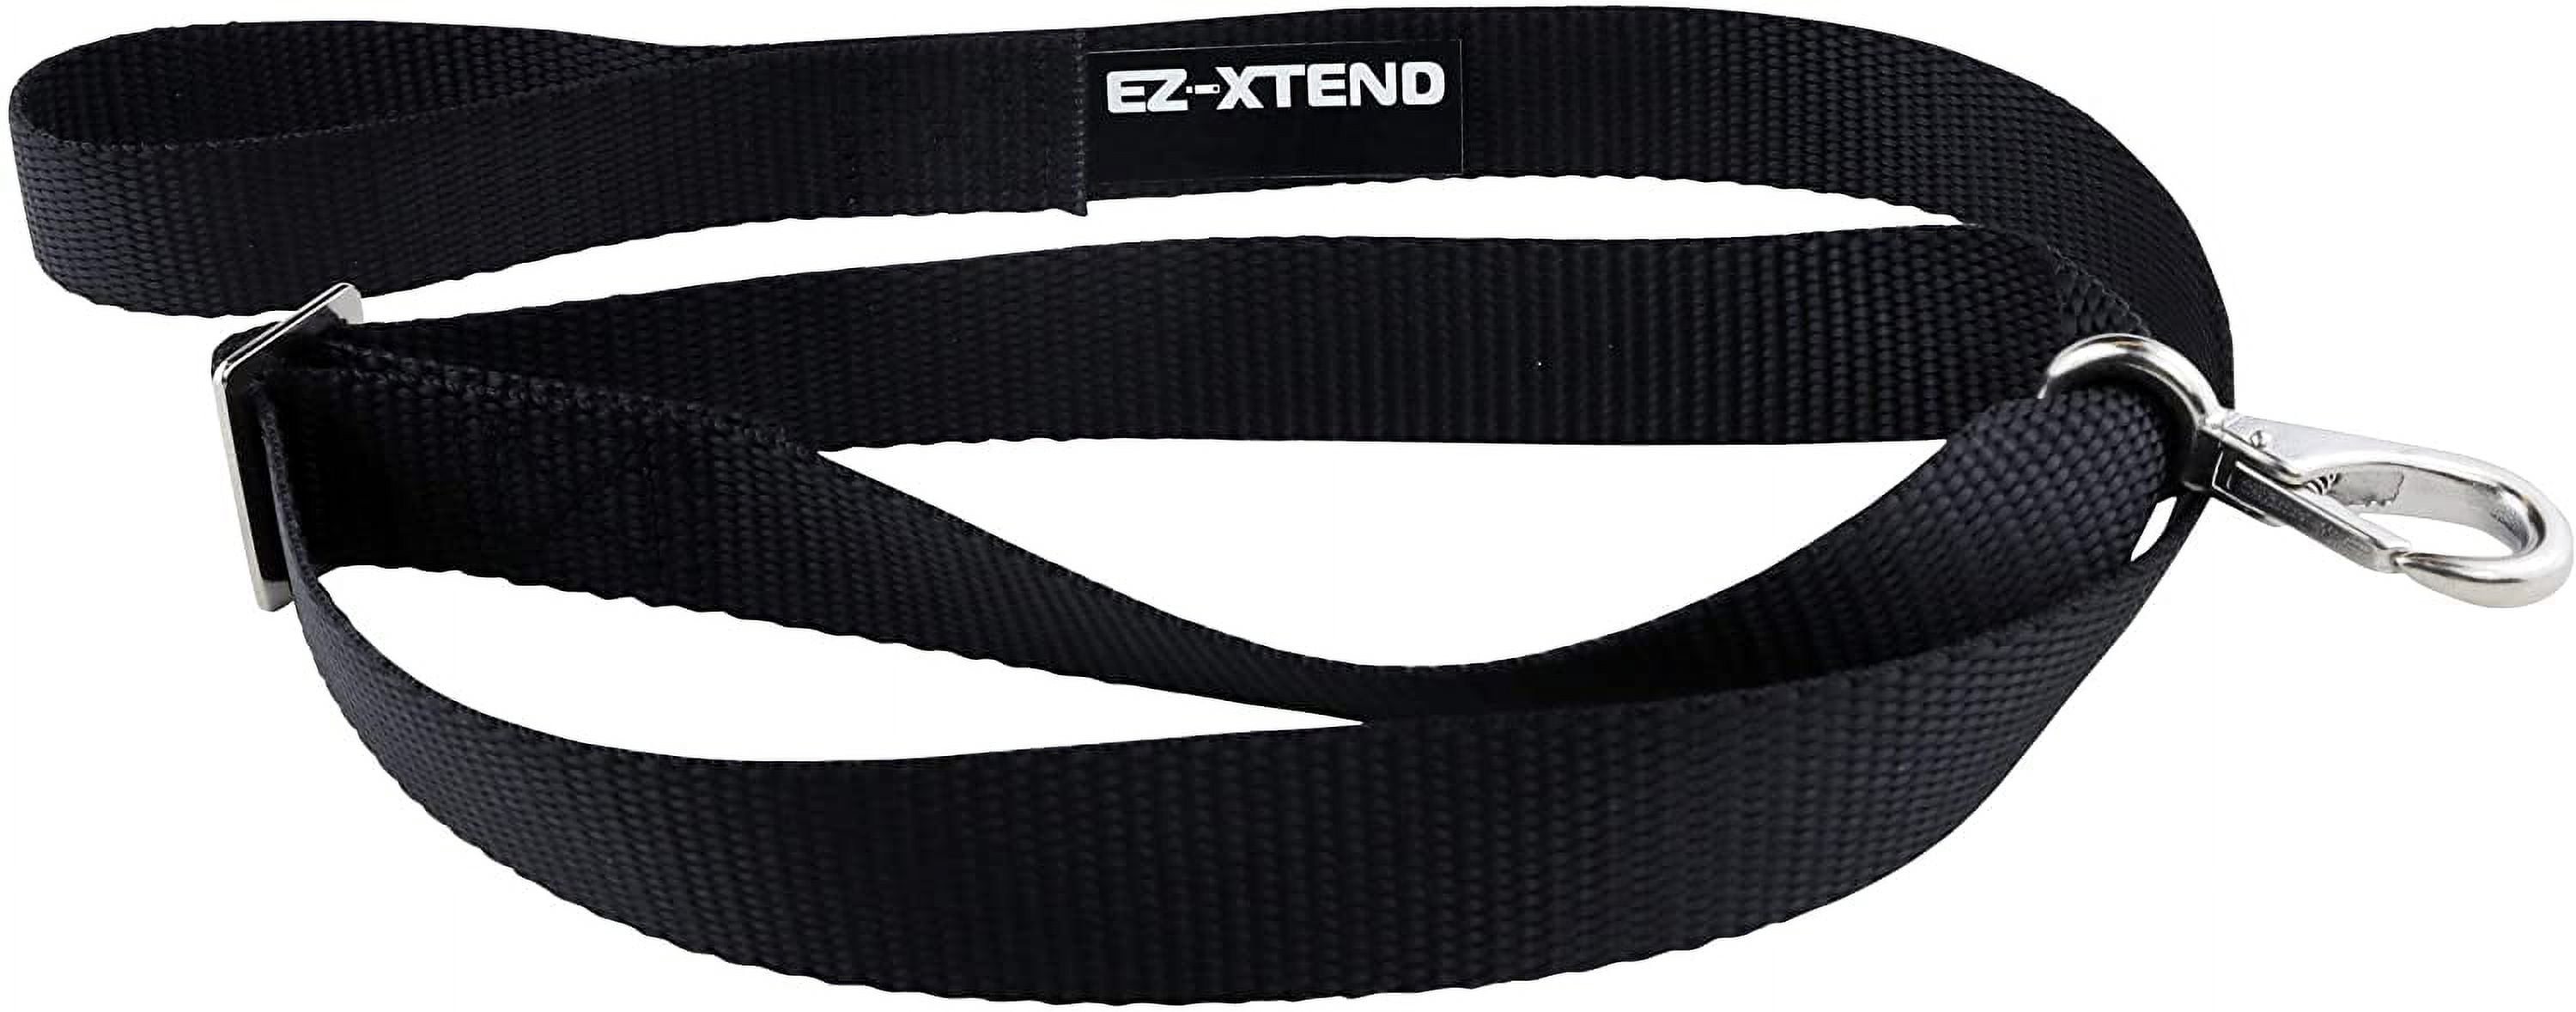 EZ-Xtend Premium Pontoon Boat Canopy and Bimini Top Strap with Adjustable  Hook - All Stainless Steel Bimini Top Hardware - Best Replacement Straps